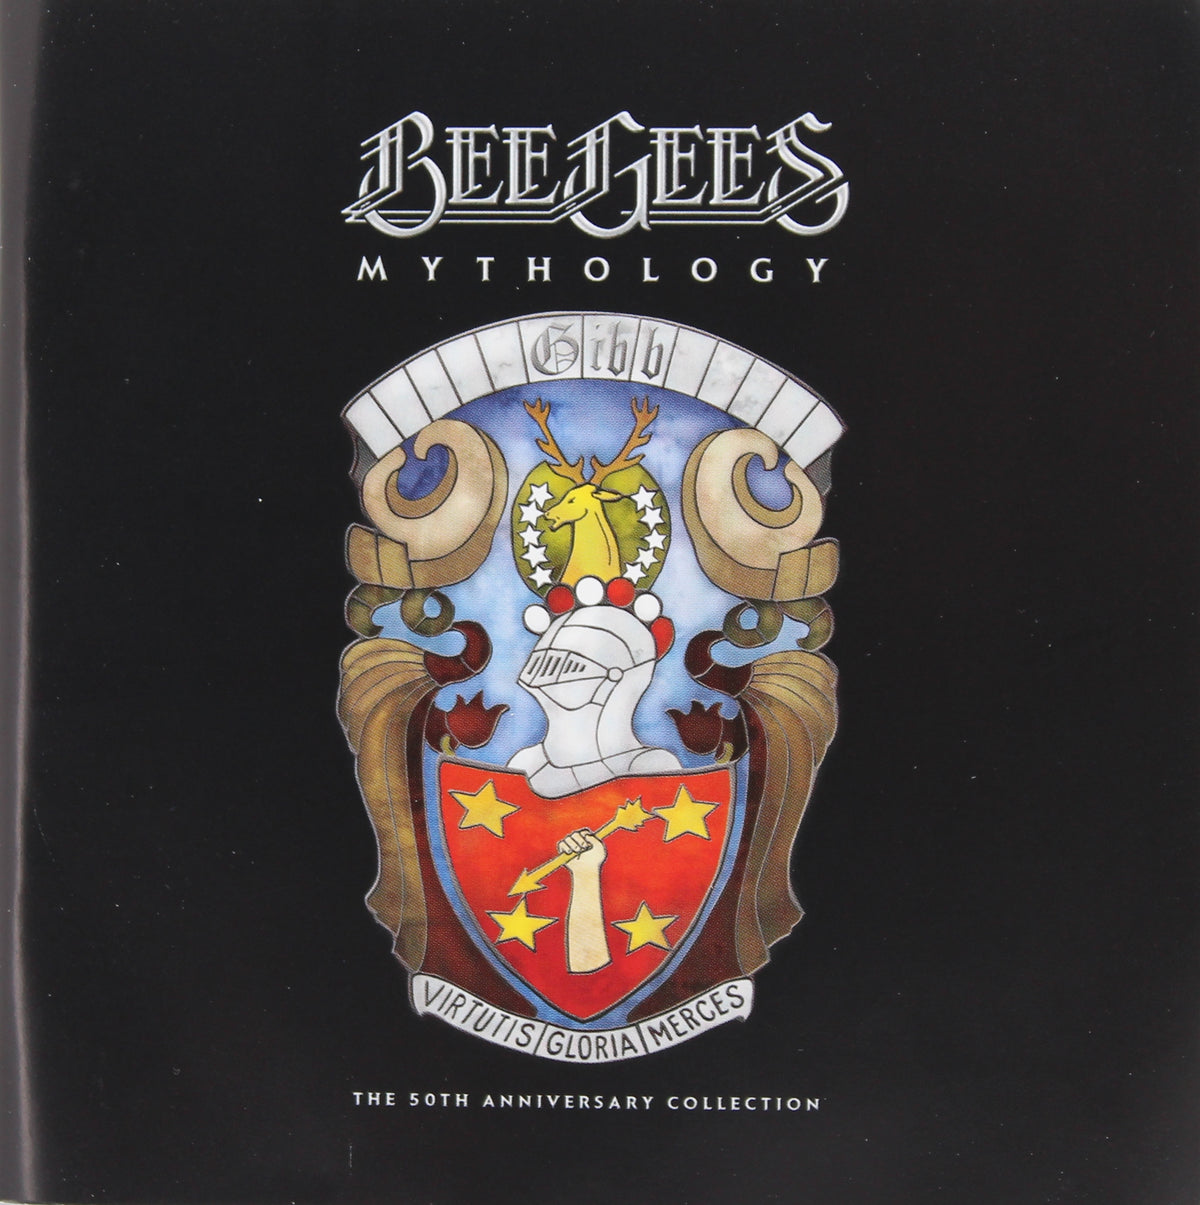 Bee Gees ‎– Mythology - The 50th Anniversary Collection, Box Set 4 × CD, Compilation, UK 2010